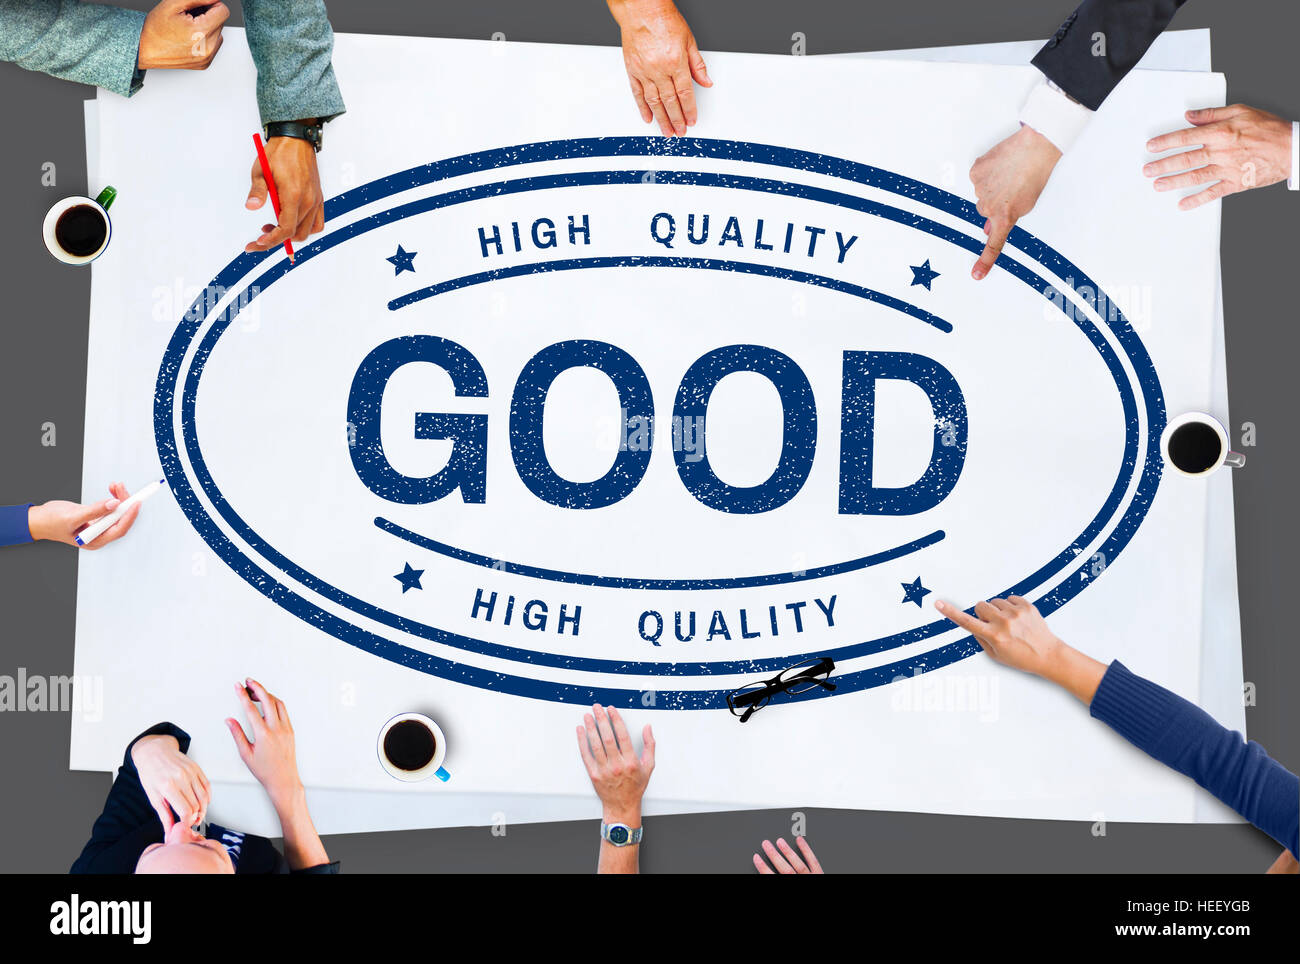 High Quality Premium Limited Value Graphic Concept Stock Photo